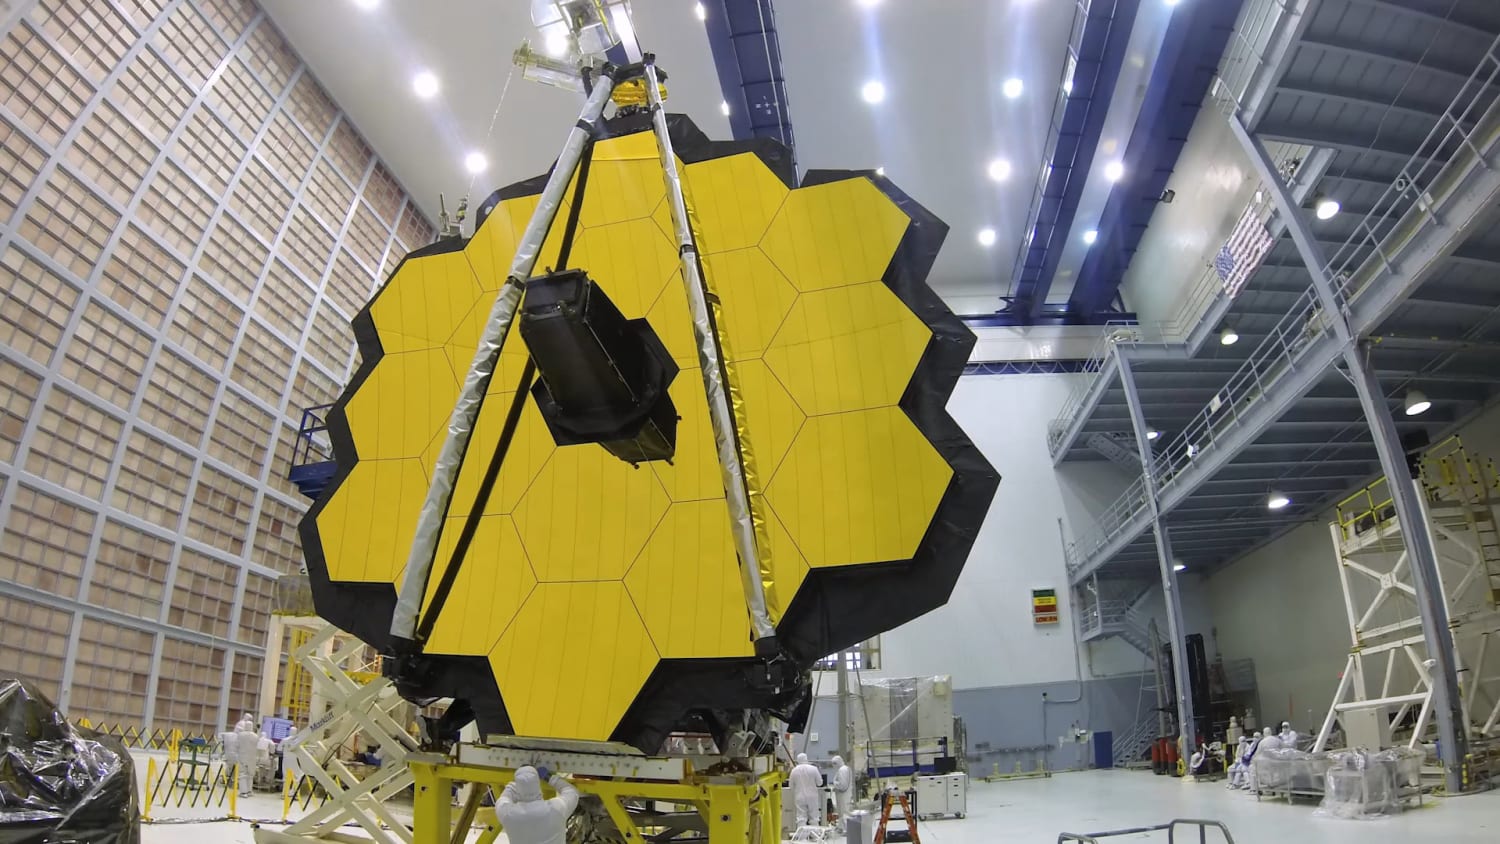 Time-lapse of packing the $10B James Webb Space Telescope in its shipping container before its transport to Johnson Space Center